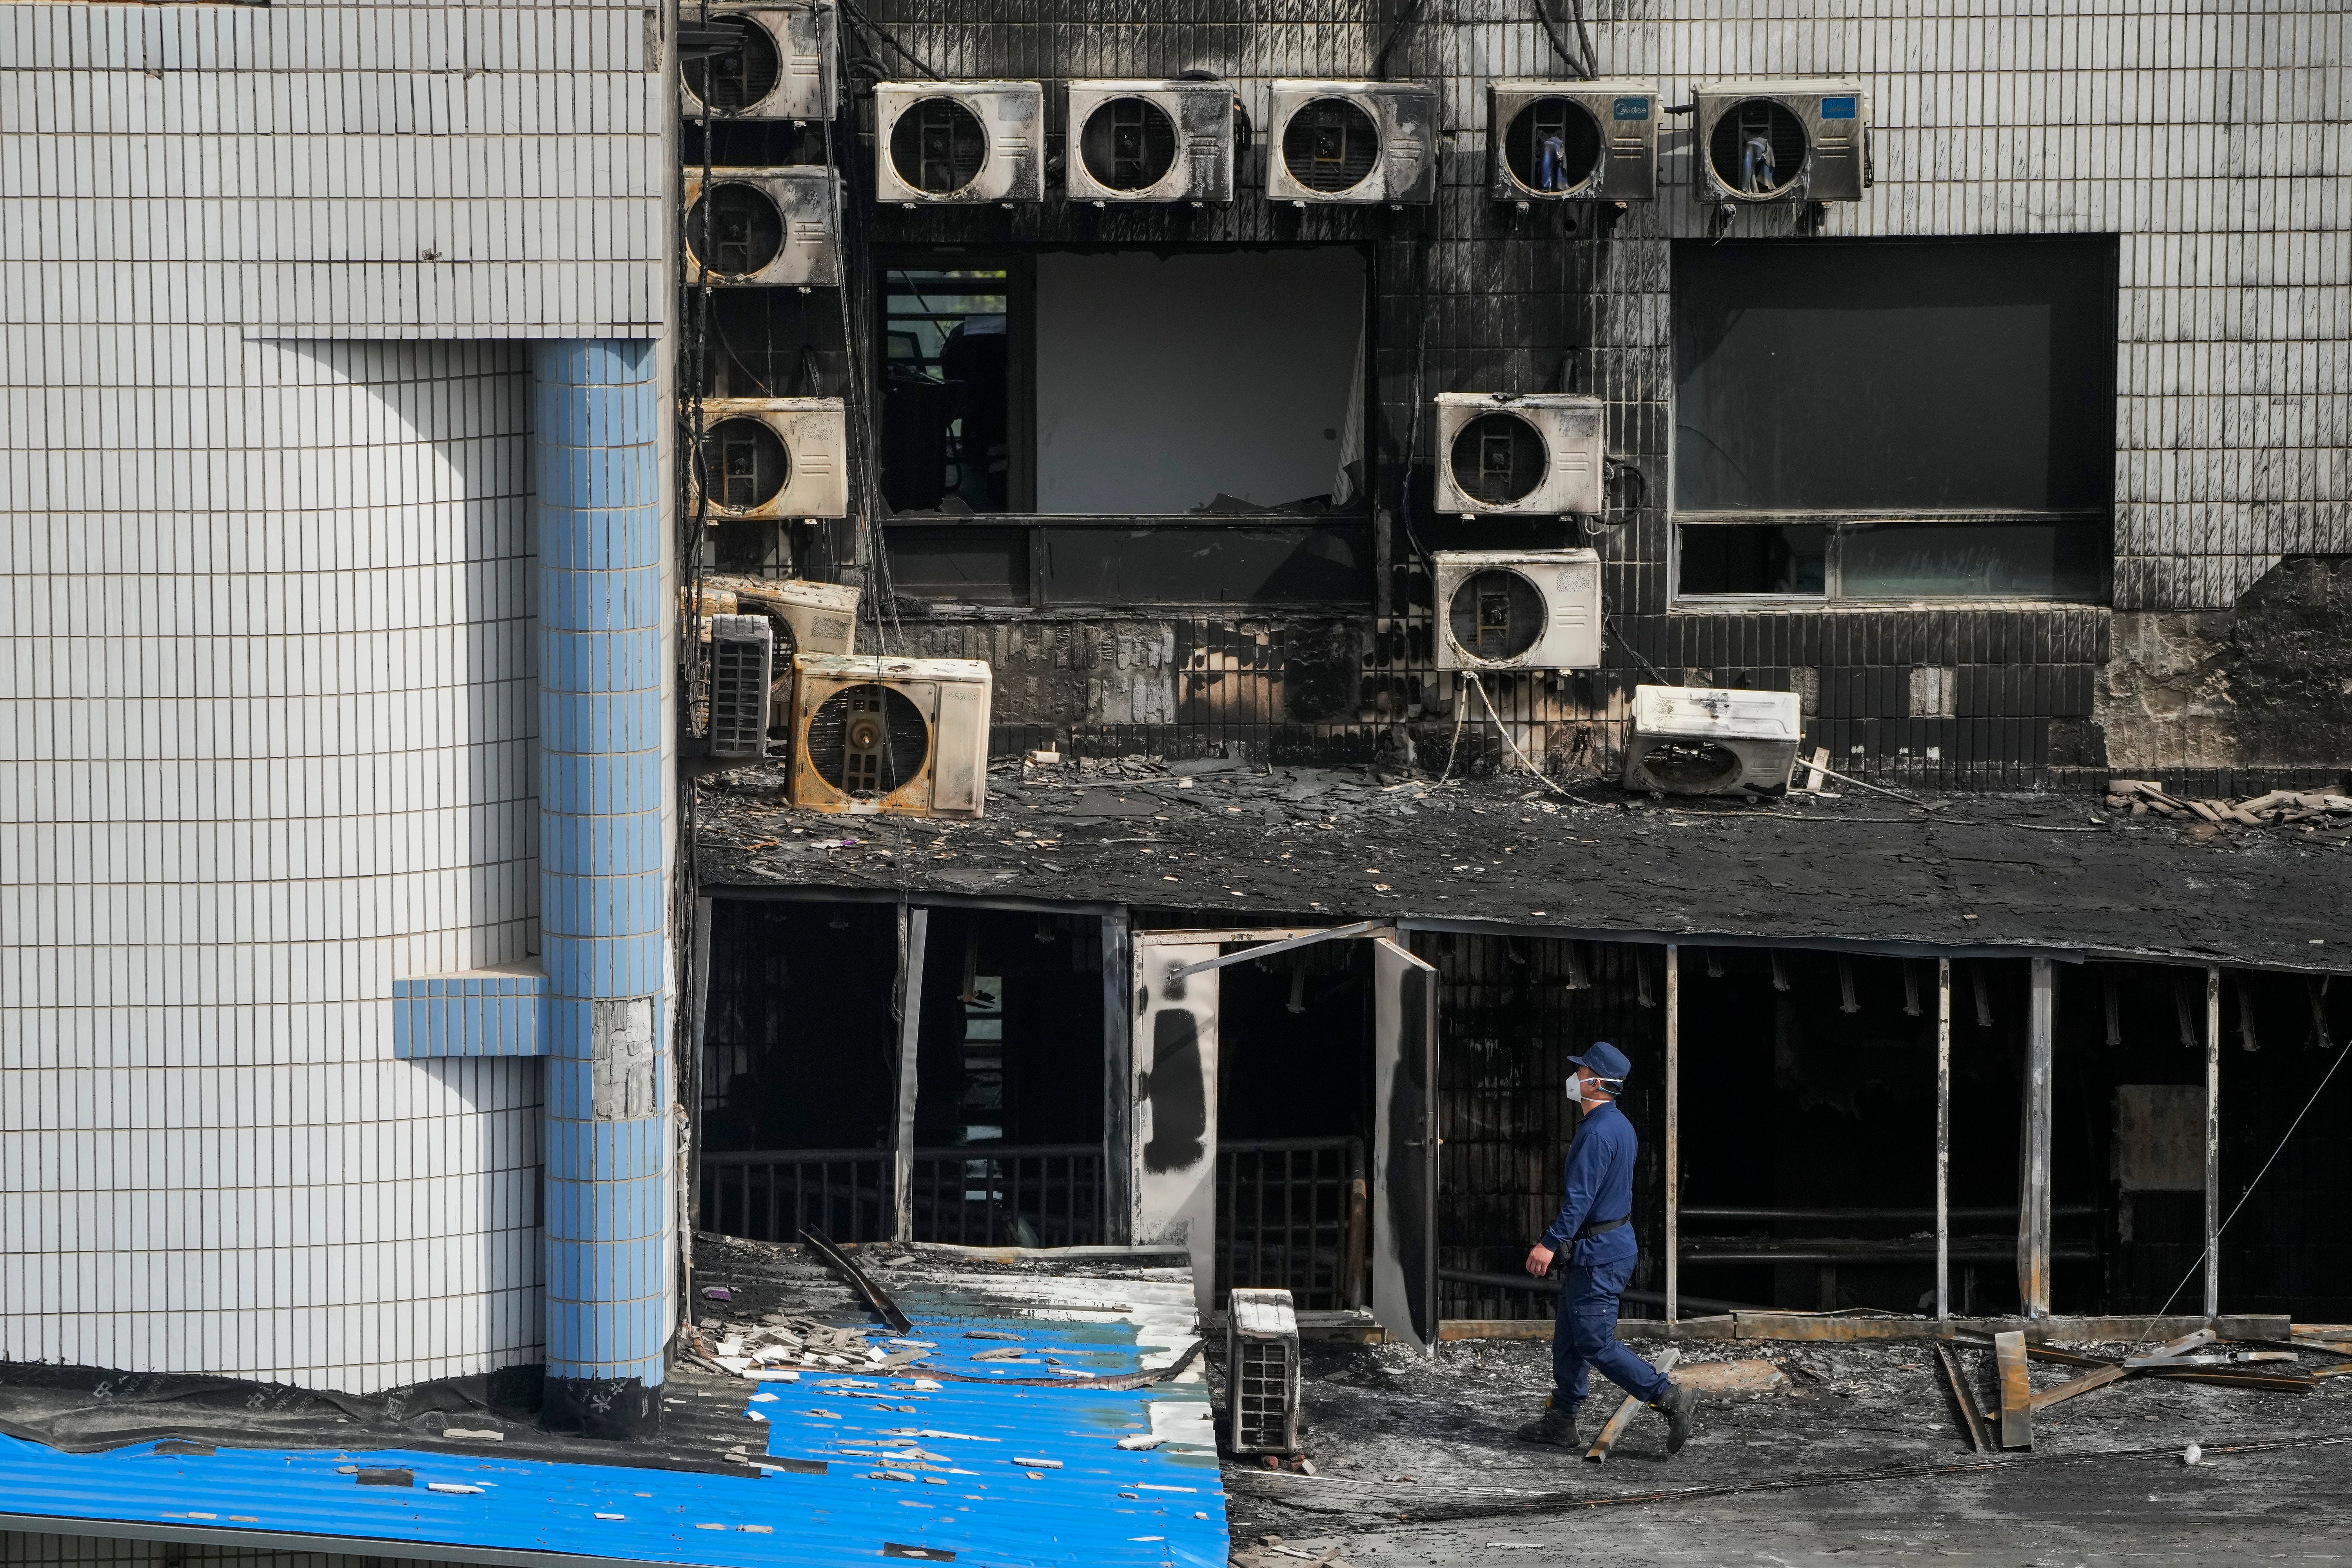 An investigator inspects burnt out area following a fire at a hospital in Beijing